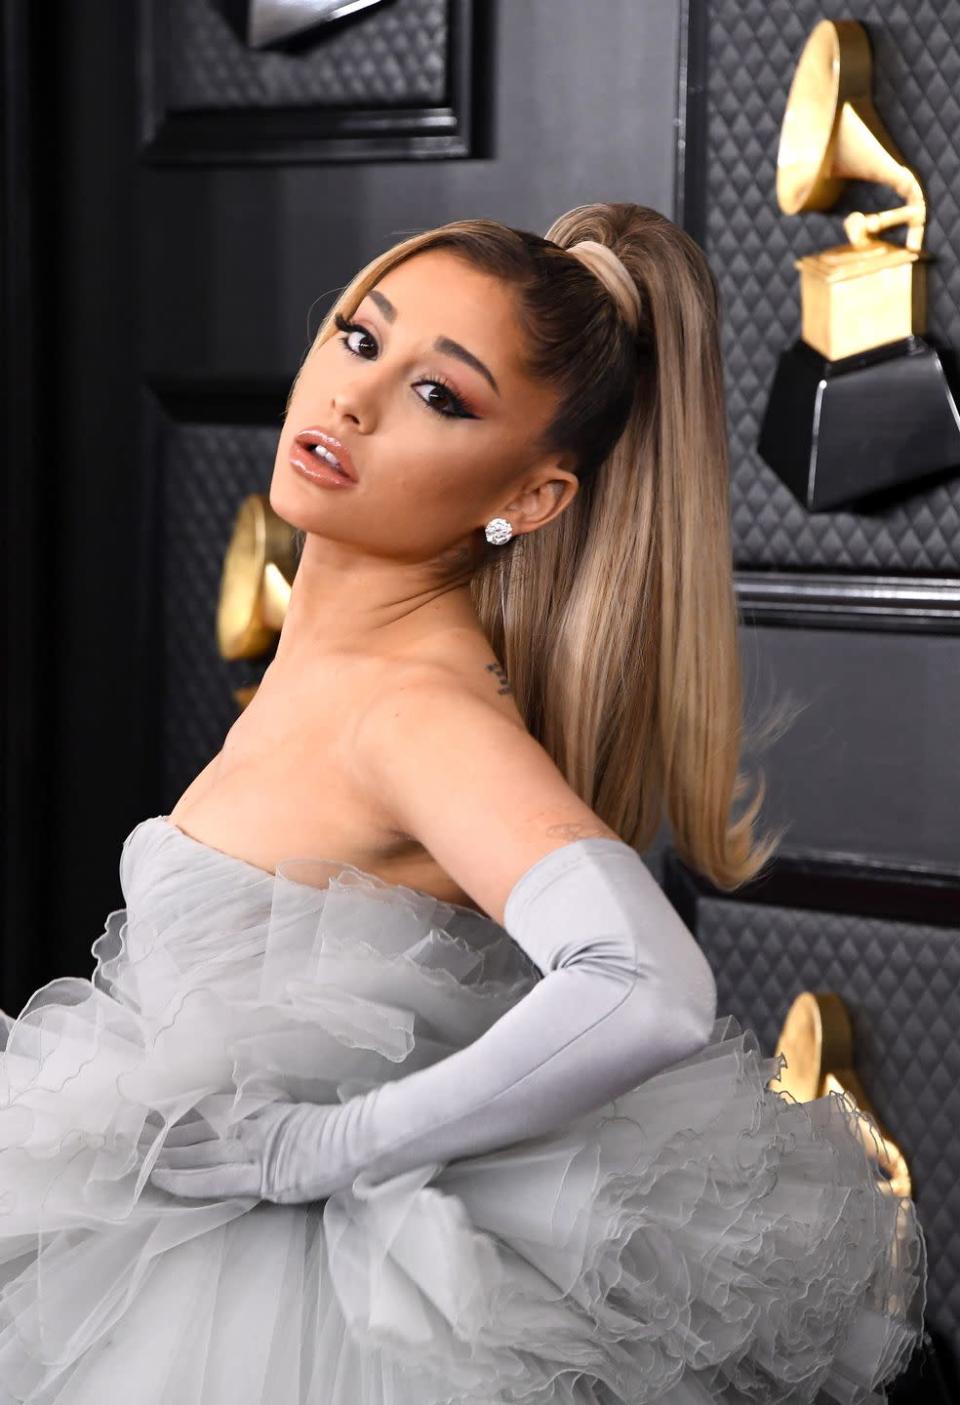 <p>Channel retro vibes inspired by the queen of ponytails herself, <strong>Ariana Grande</strong>. Flip out the ends and keep the bangs out on one side for a glam take on a '90s style. </p>